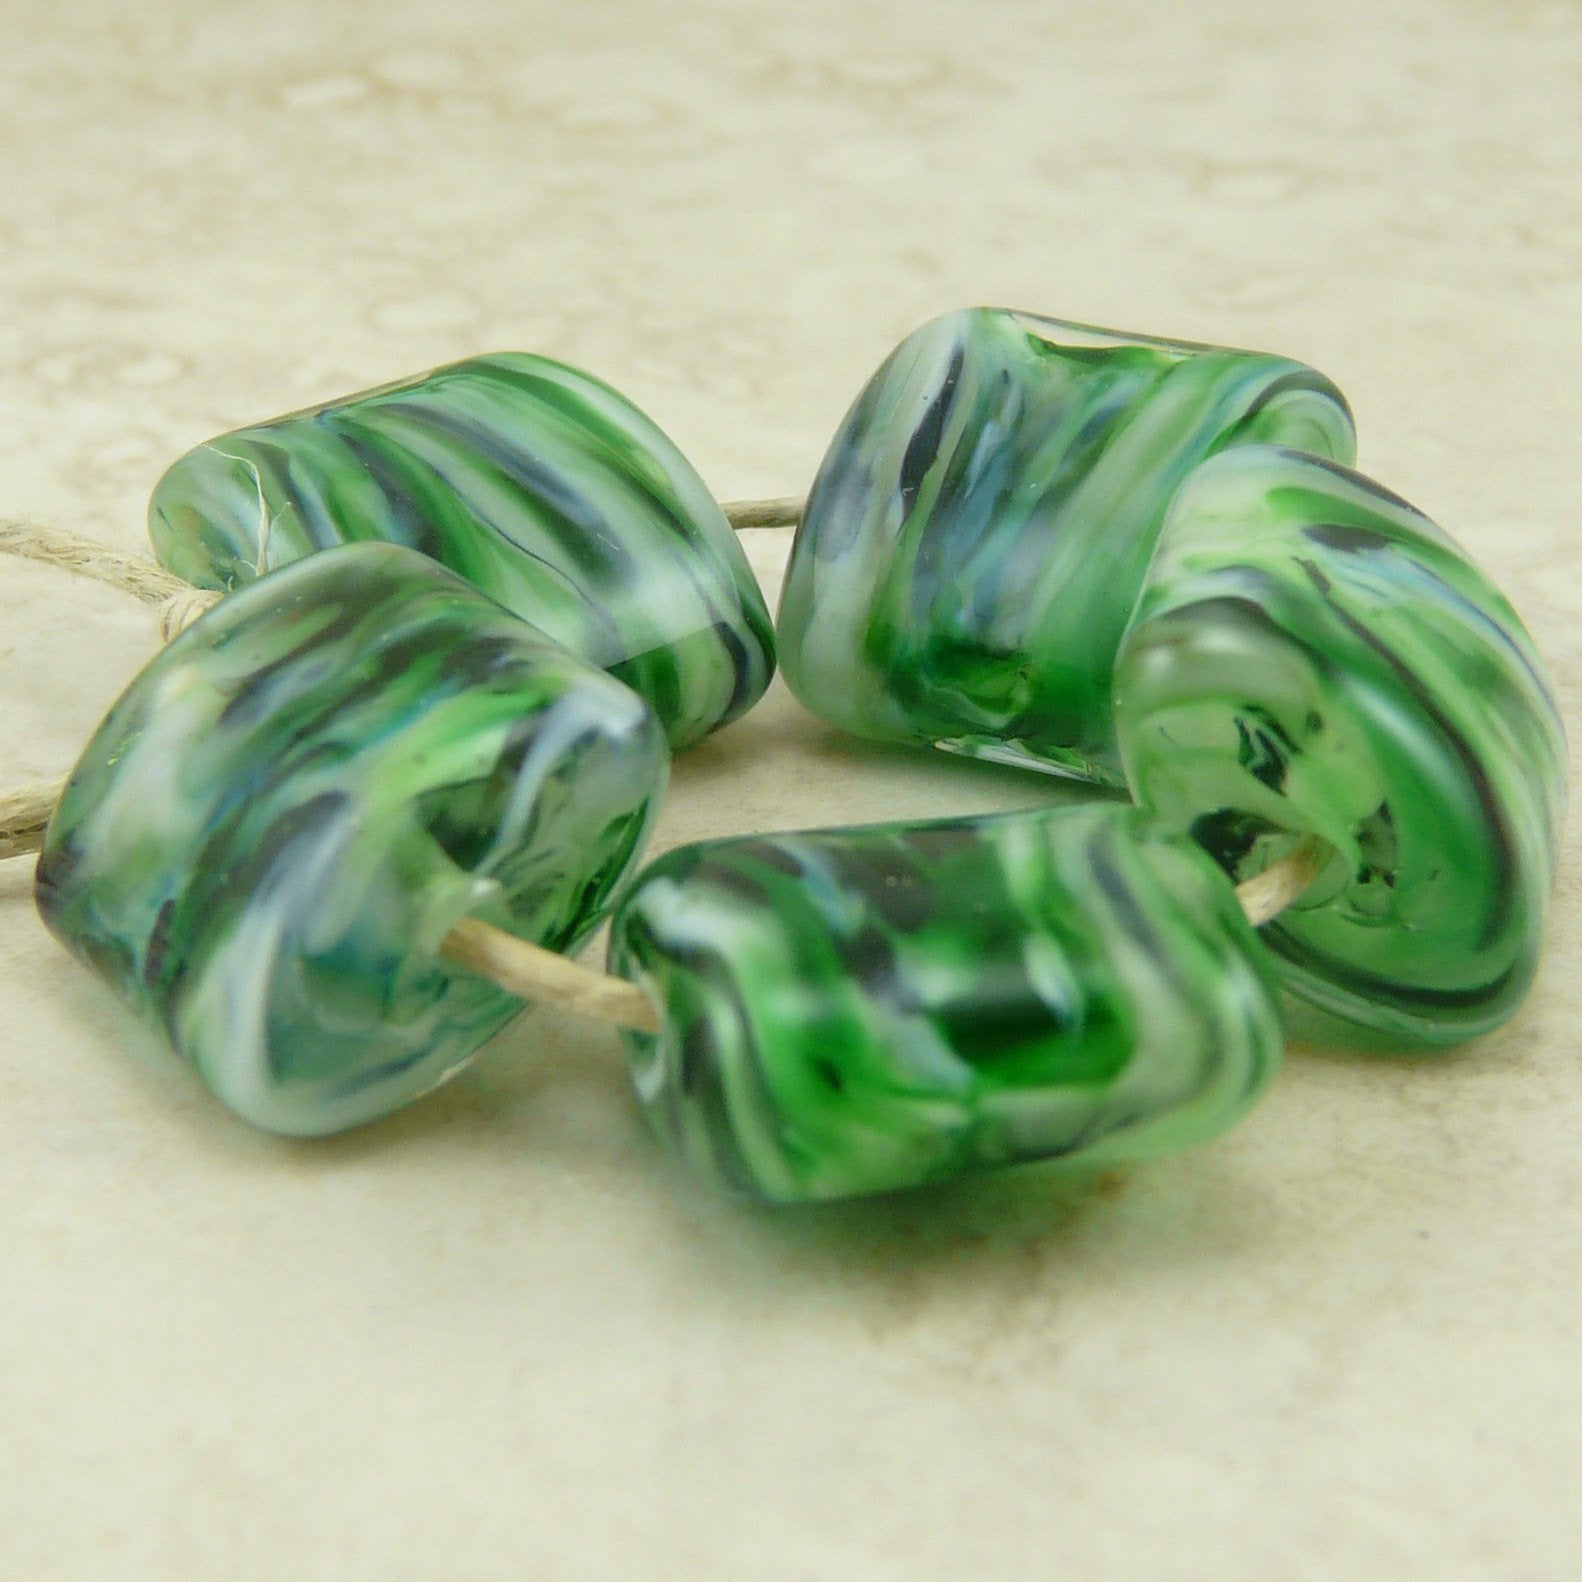 Pine Tree Forest - Lampwork Bead Set by Dragynsfyre Designs - SRA